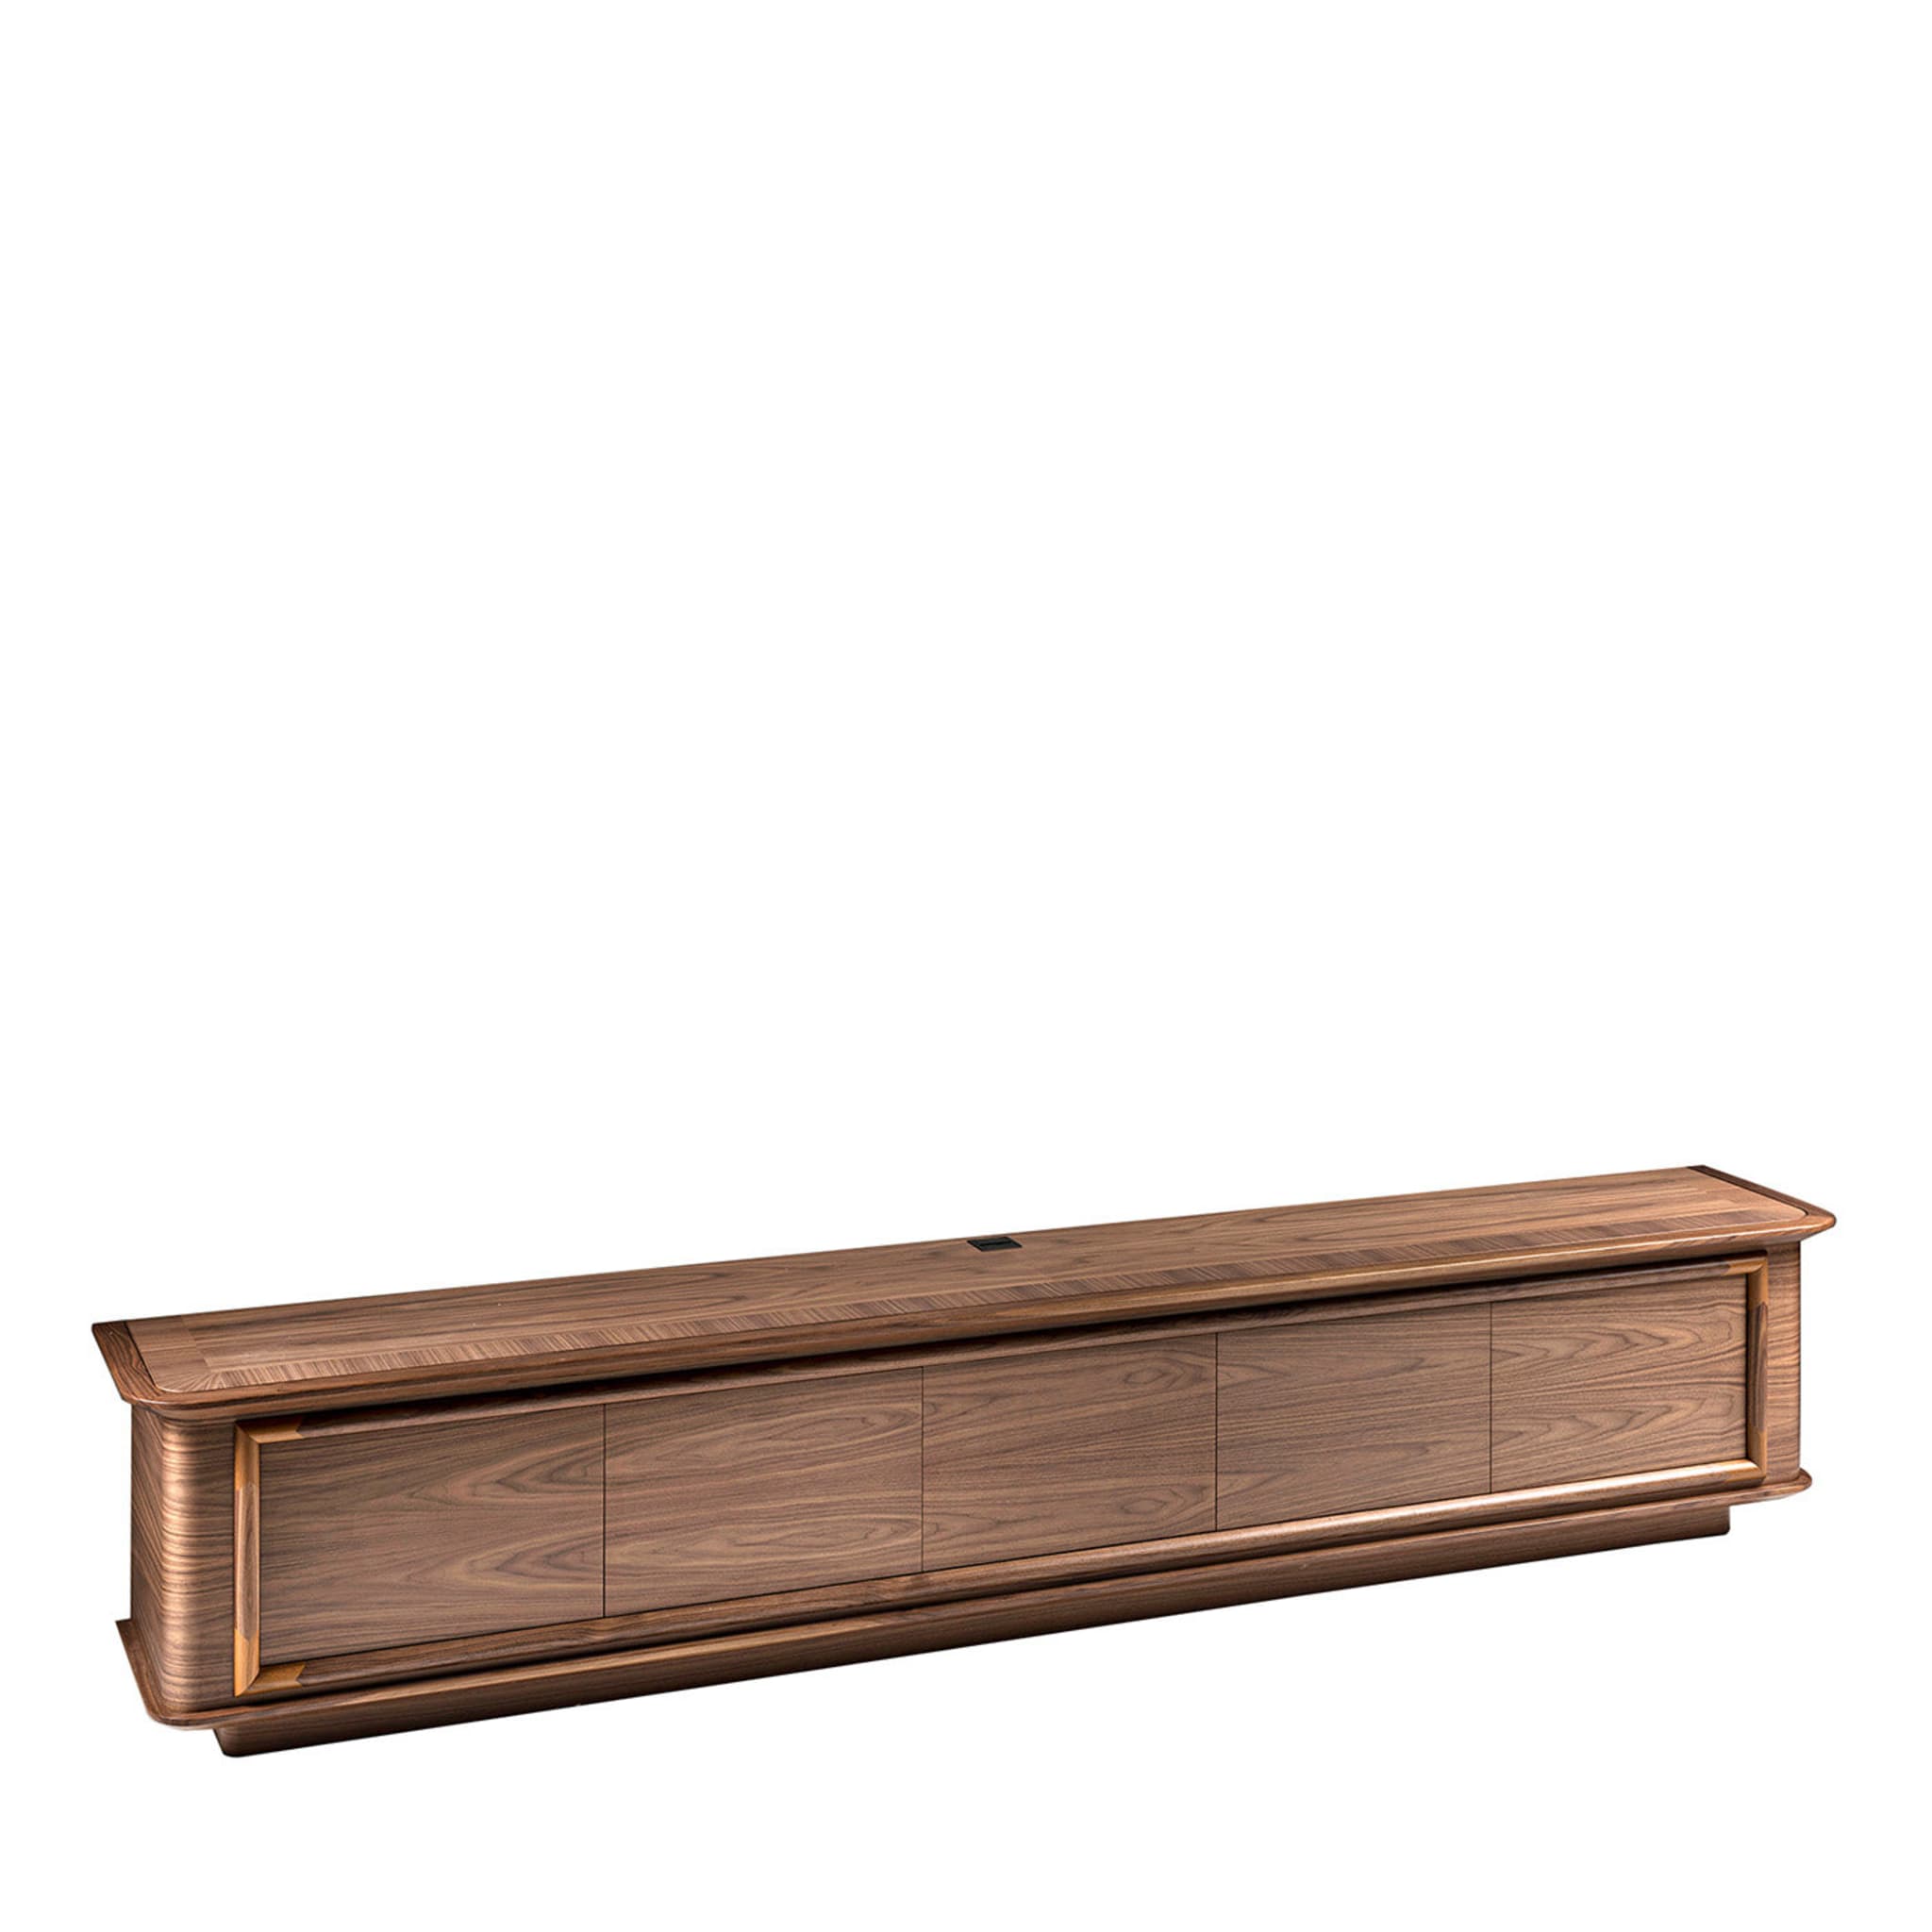 Parlato Media Sideboard by Luciano Colombo - Main view